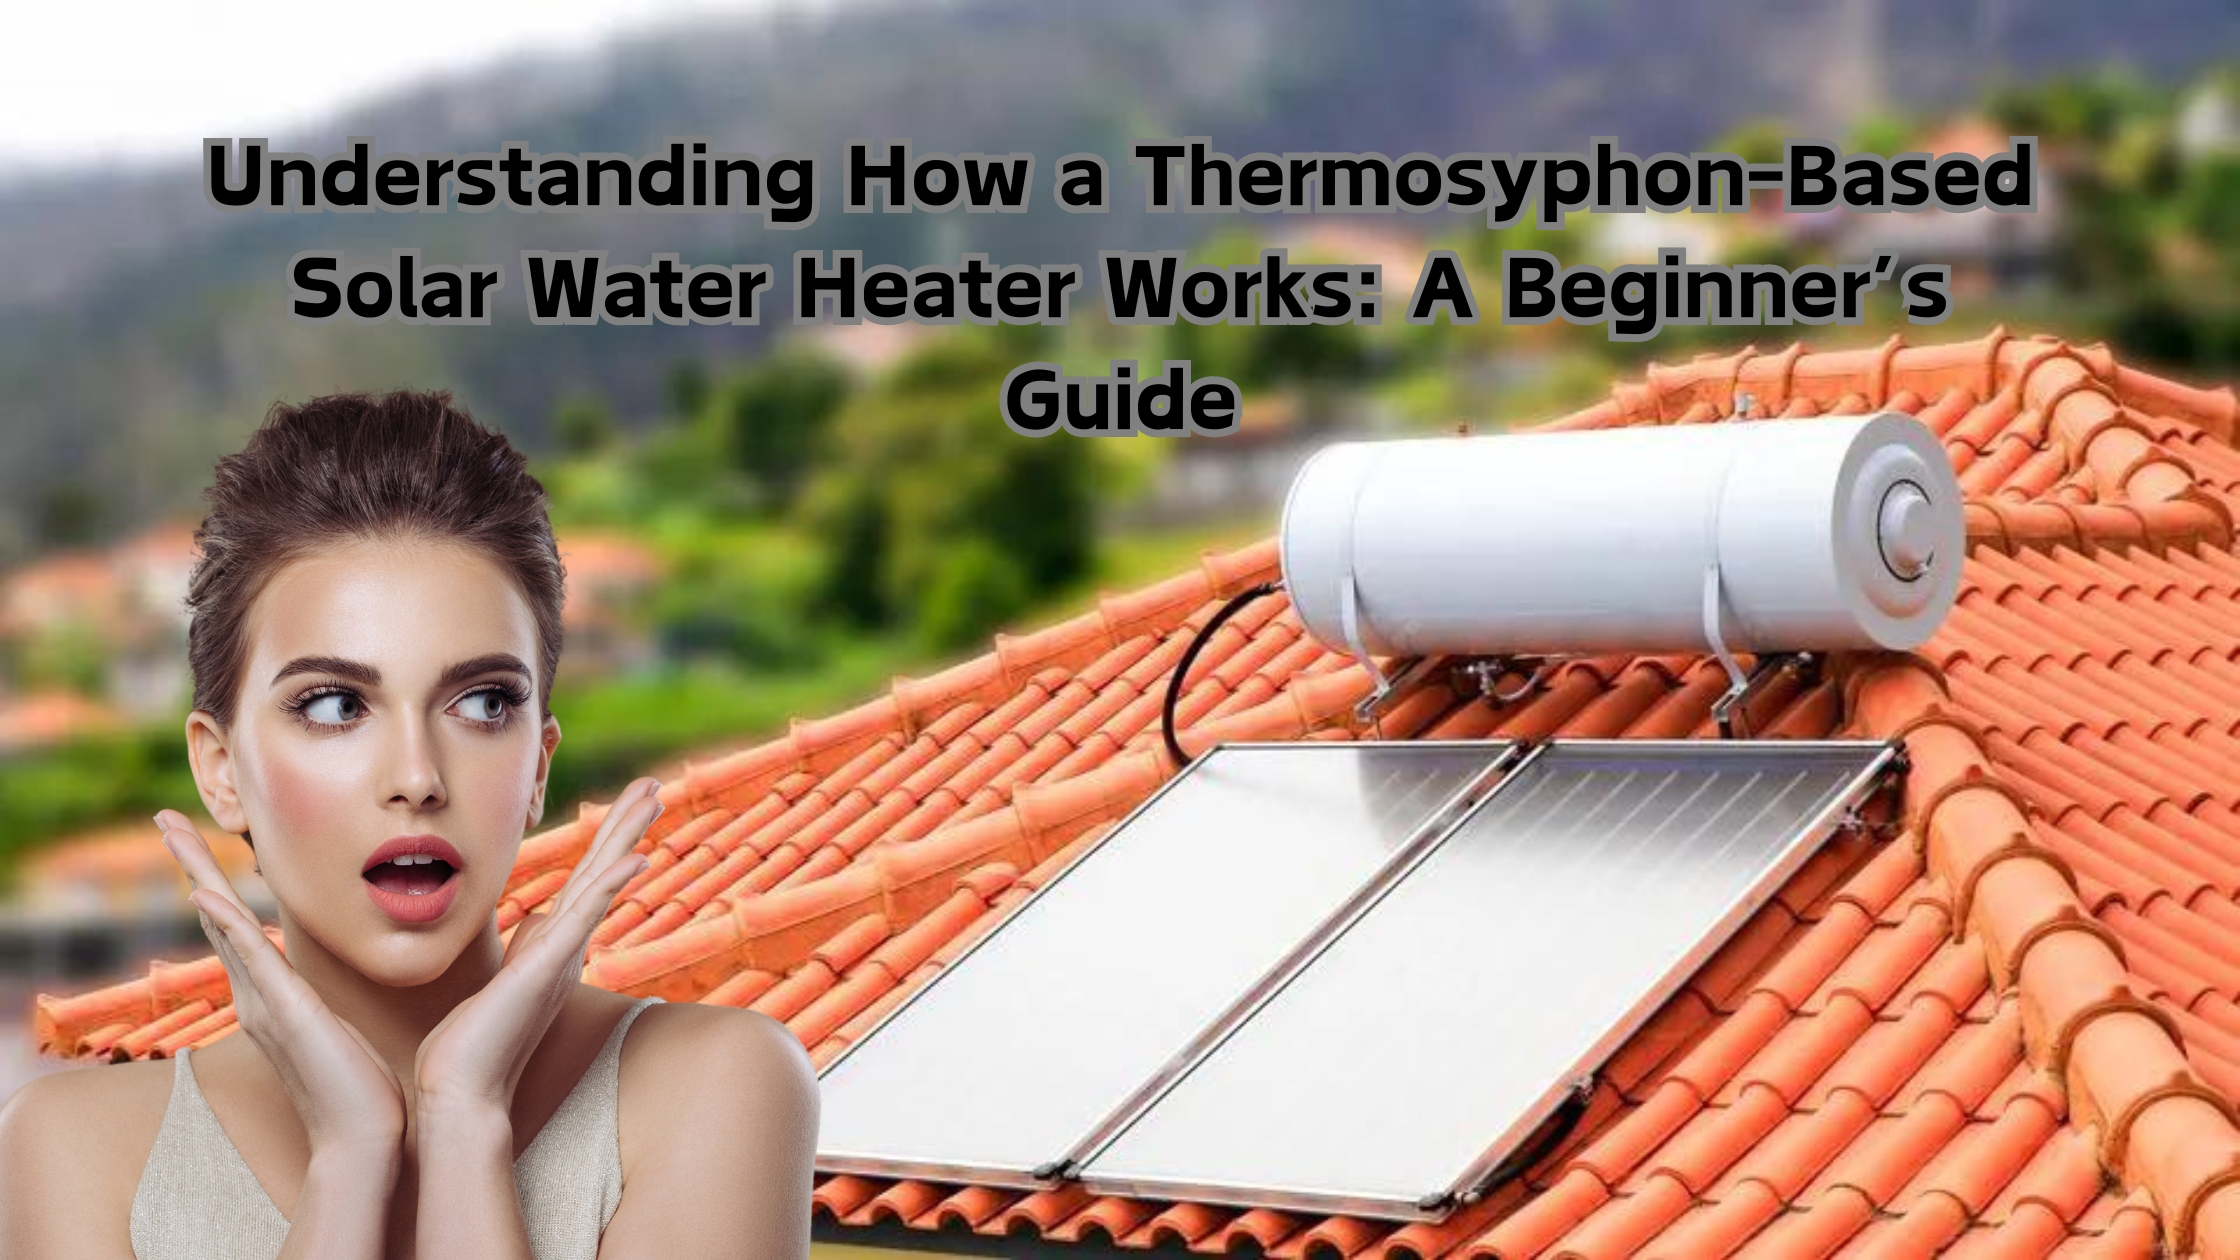 Understanding How a Thermosyphon-Based Solar Water Heater Works: A Beginner’s Guide 